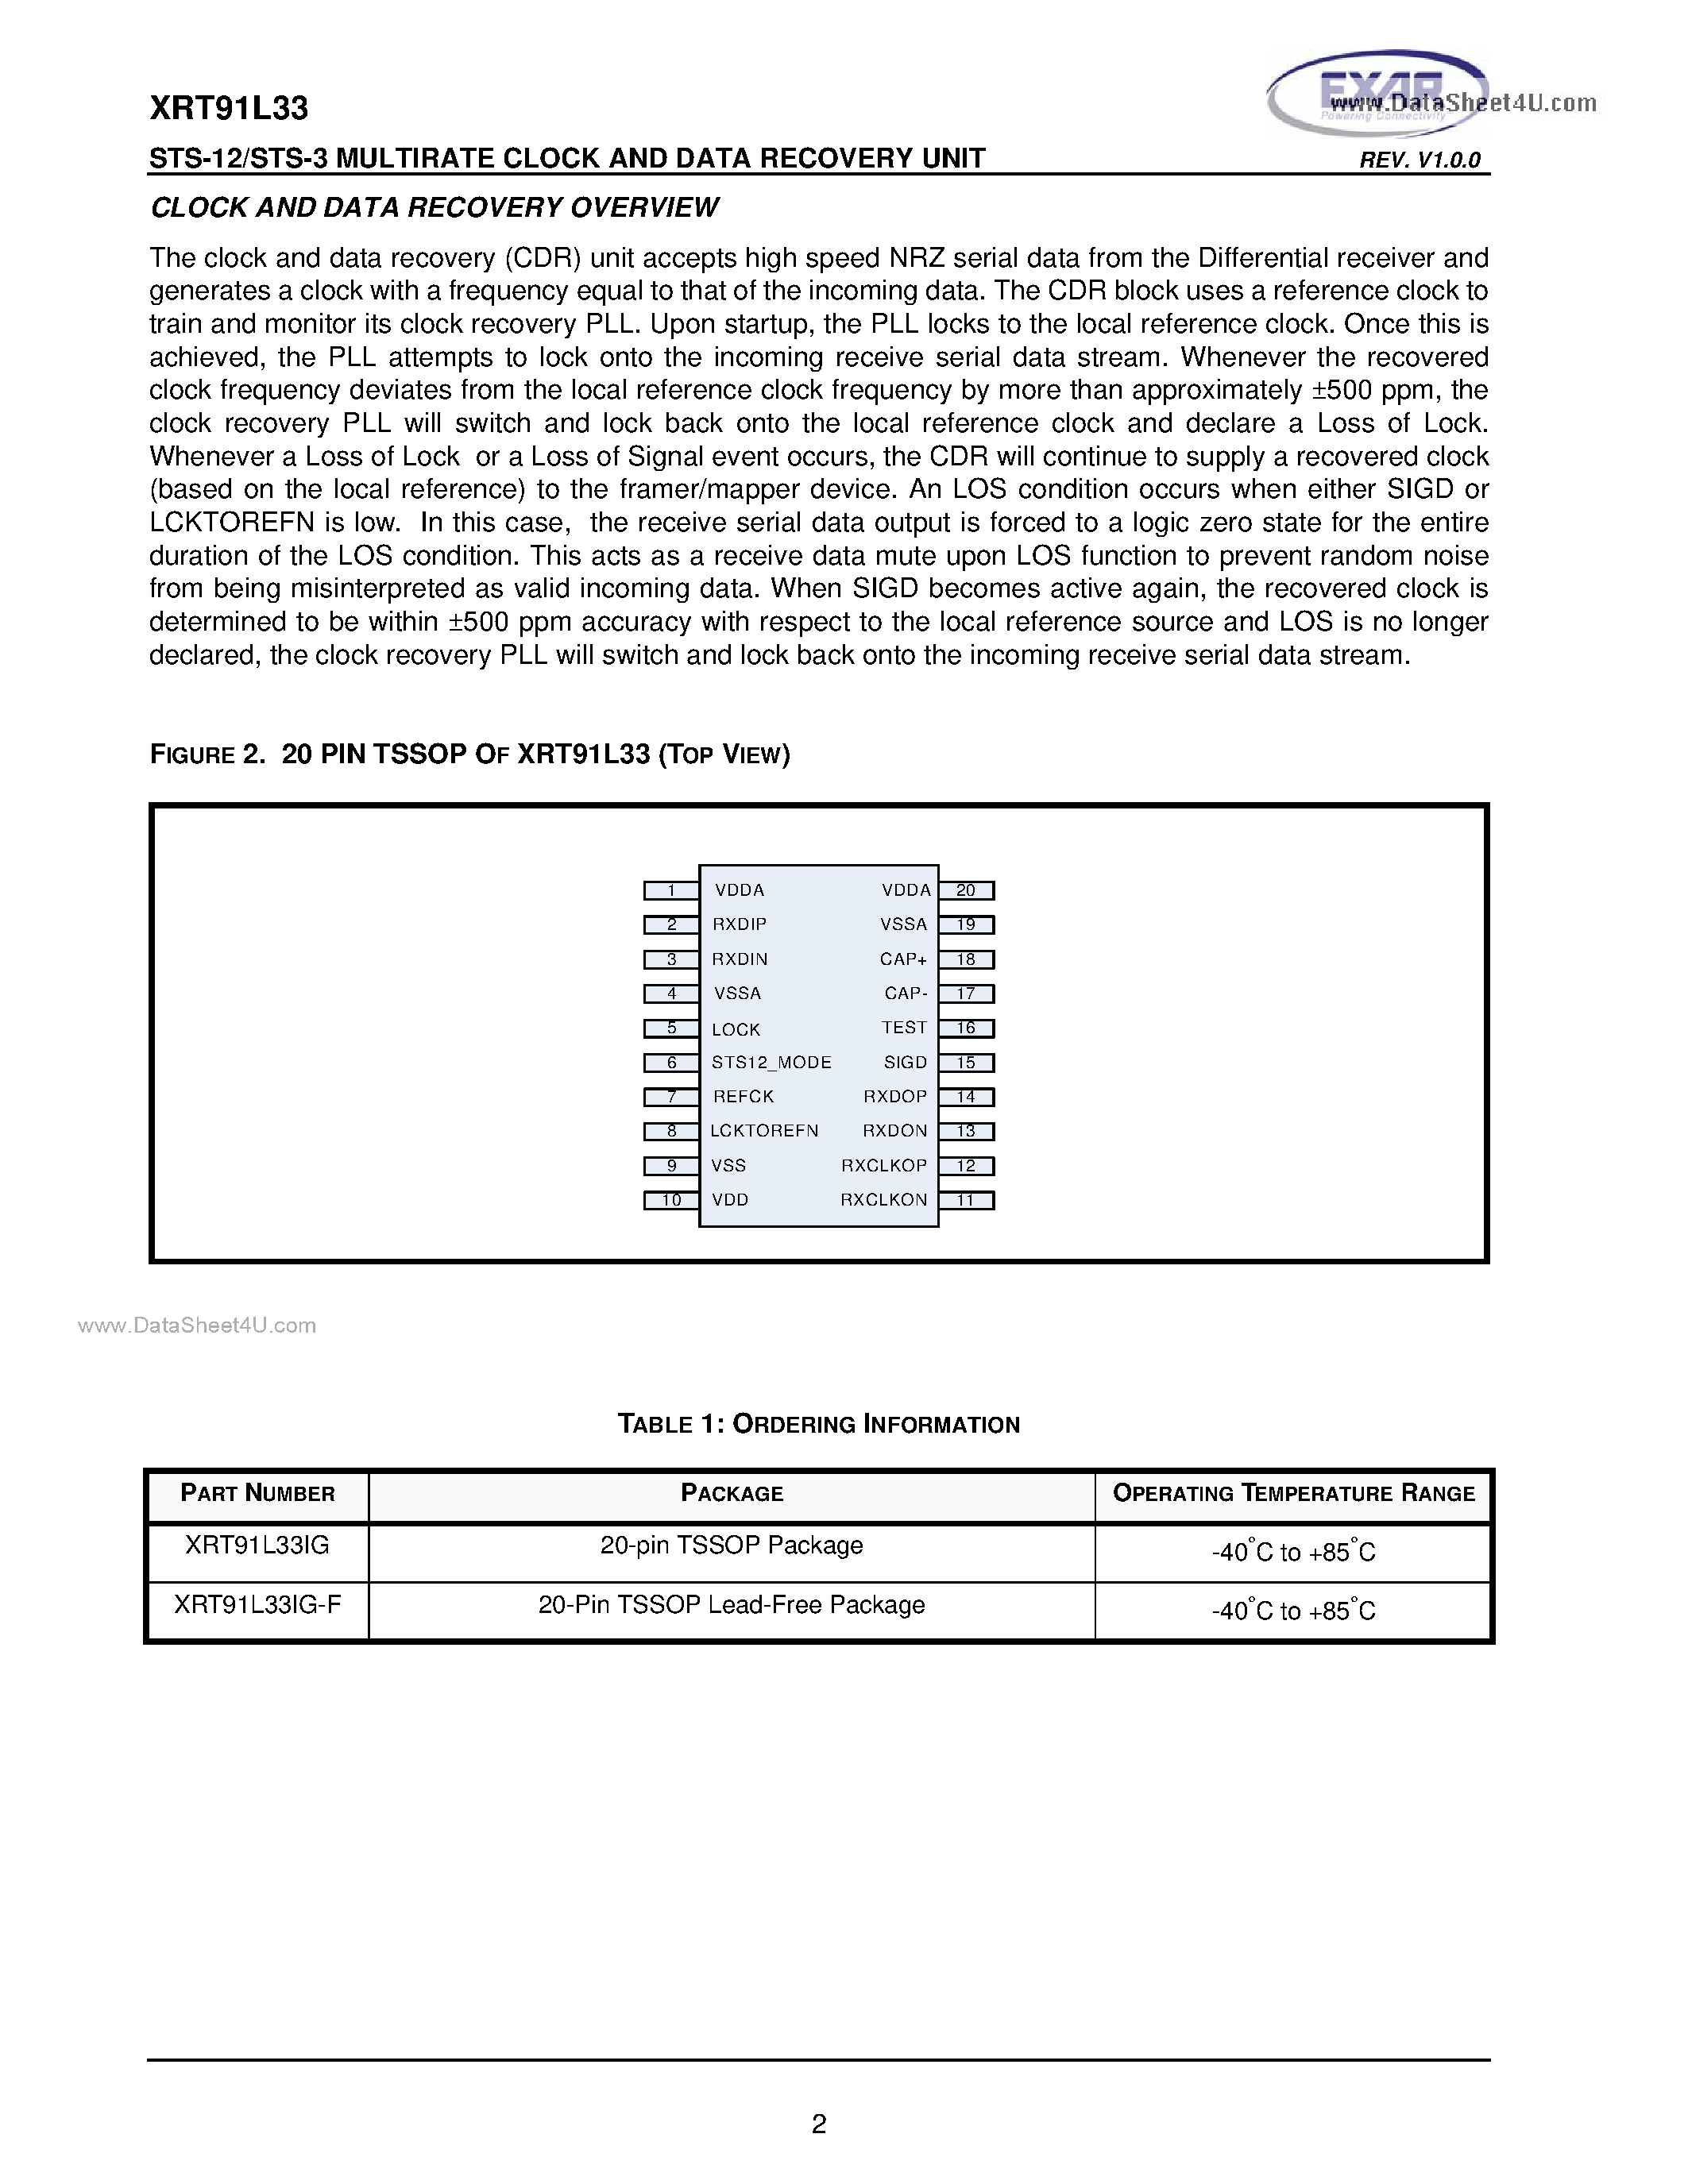 Datasheet XRT91L33 - STS-12/STS-3 MULTIRATE CLOCK AND DATA RECOVERY UNIT page 2